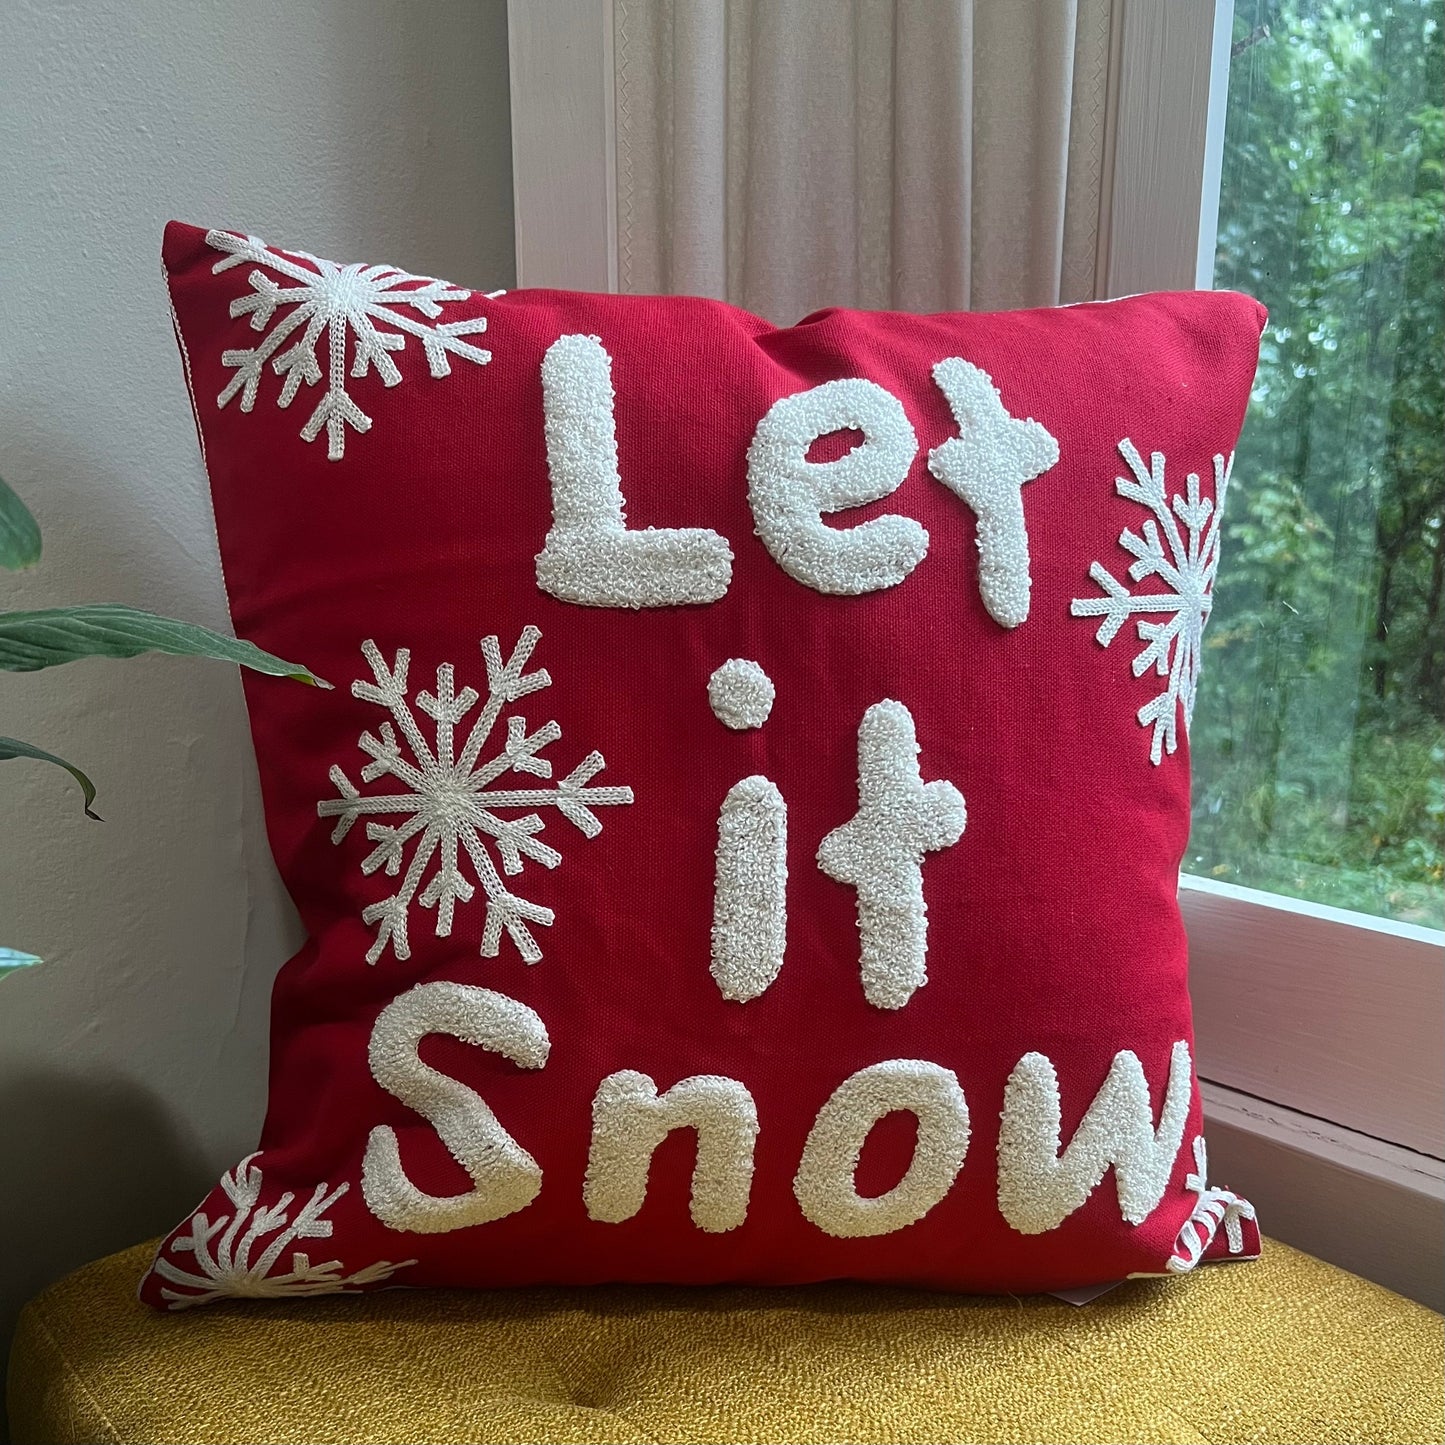 Country Christmas Décor  Let It Snow Pillow Cover 12 x 20